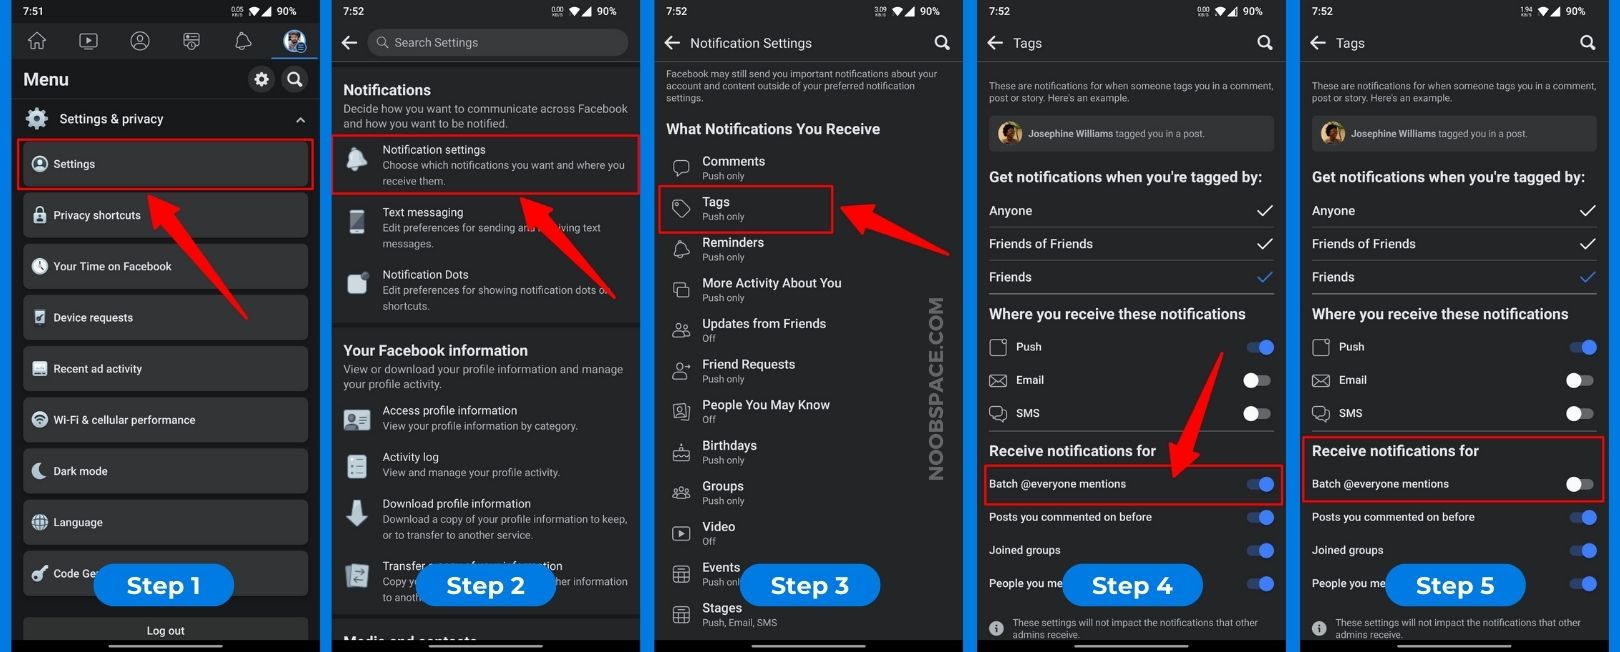 Step-by-step guide to turn off @friends tag notifications on Facebook